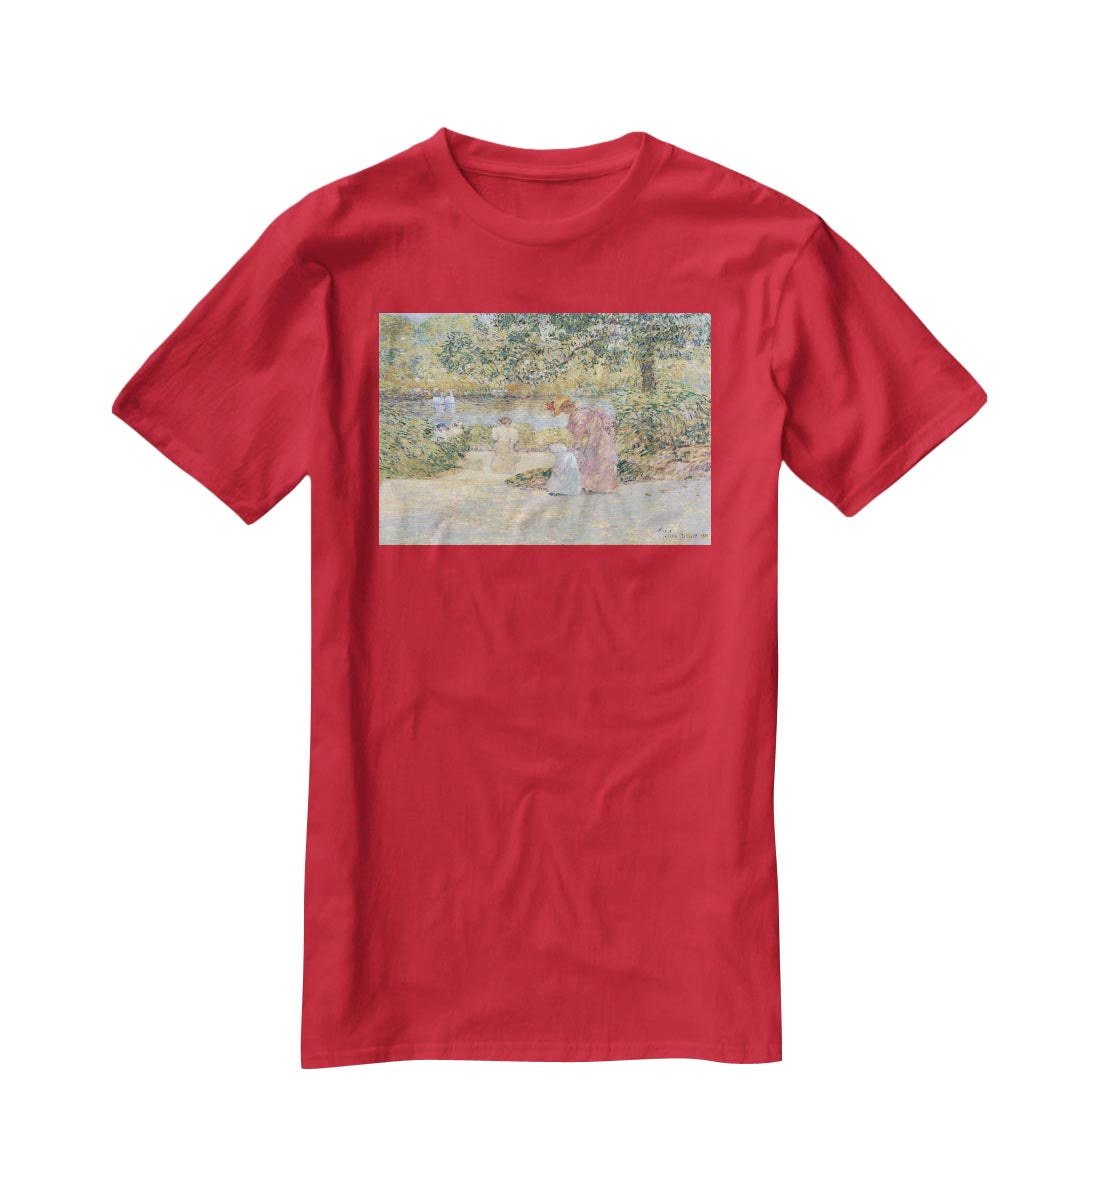 The staircase at Central Park by Hassam T-Shirt - Canvas Art Rocks - 4